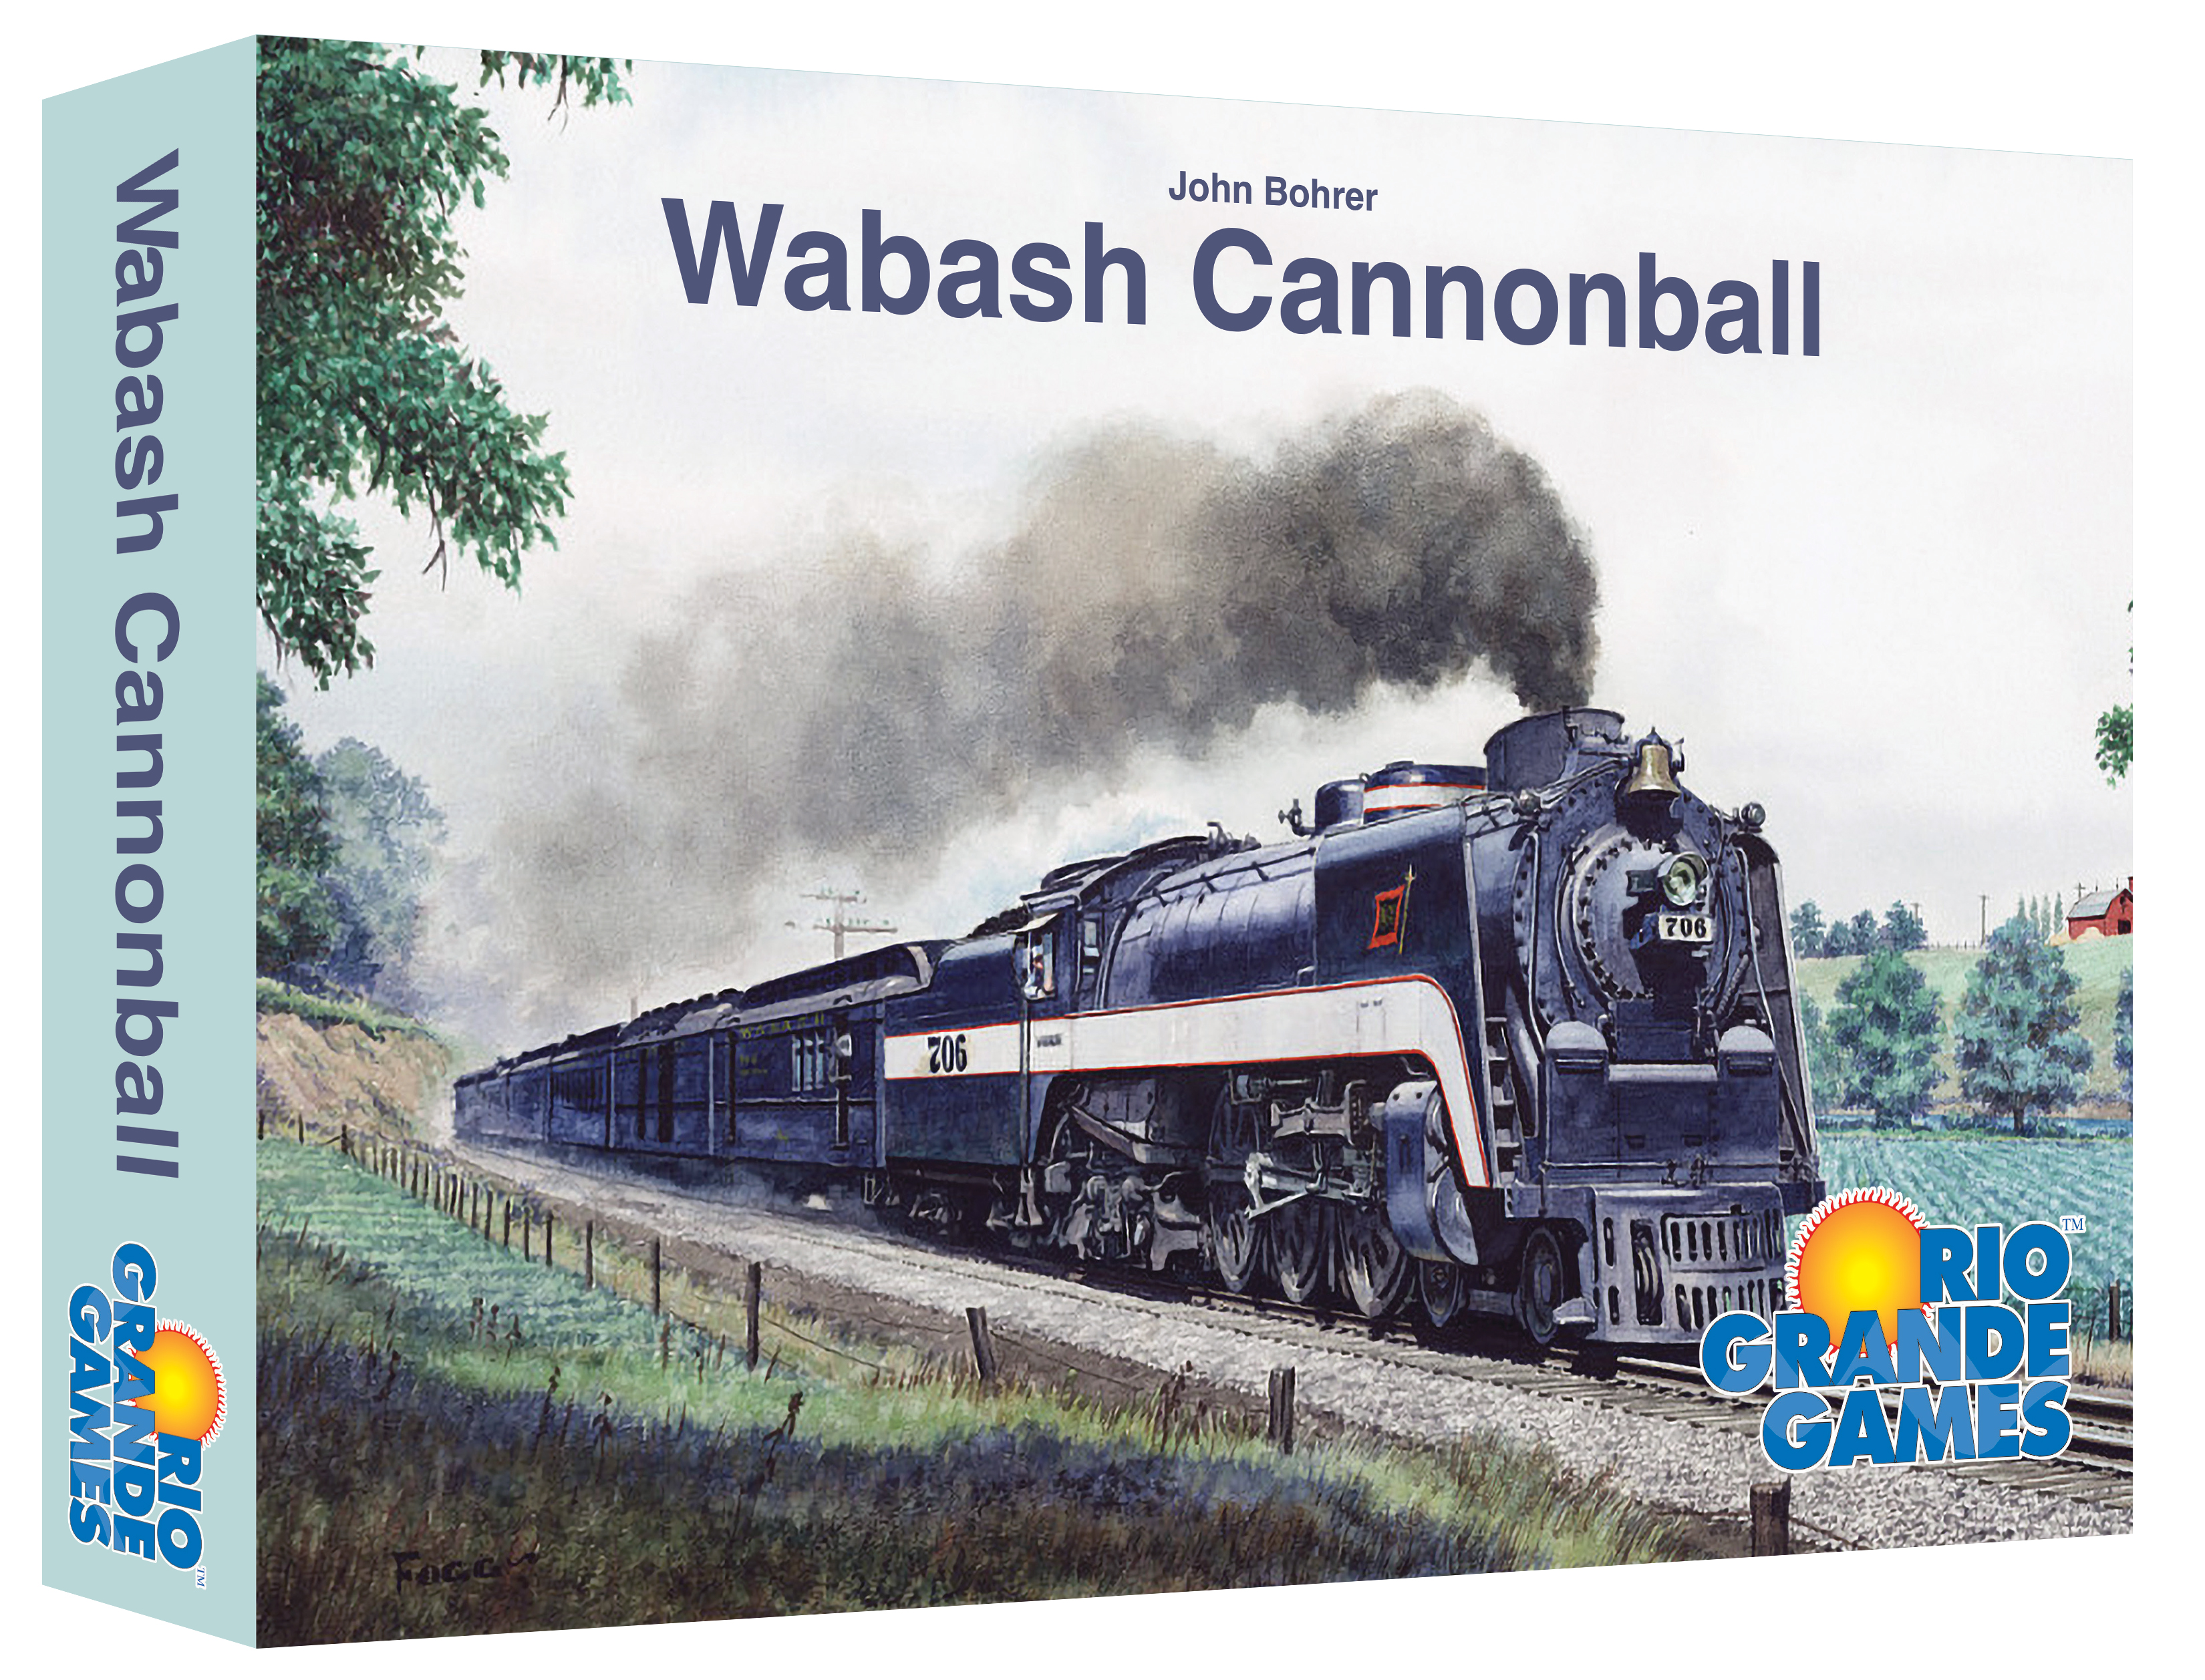 GTM #278 - Wabash Cannonball